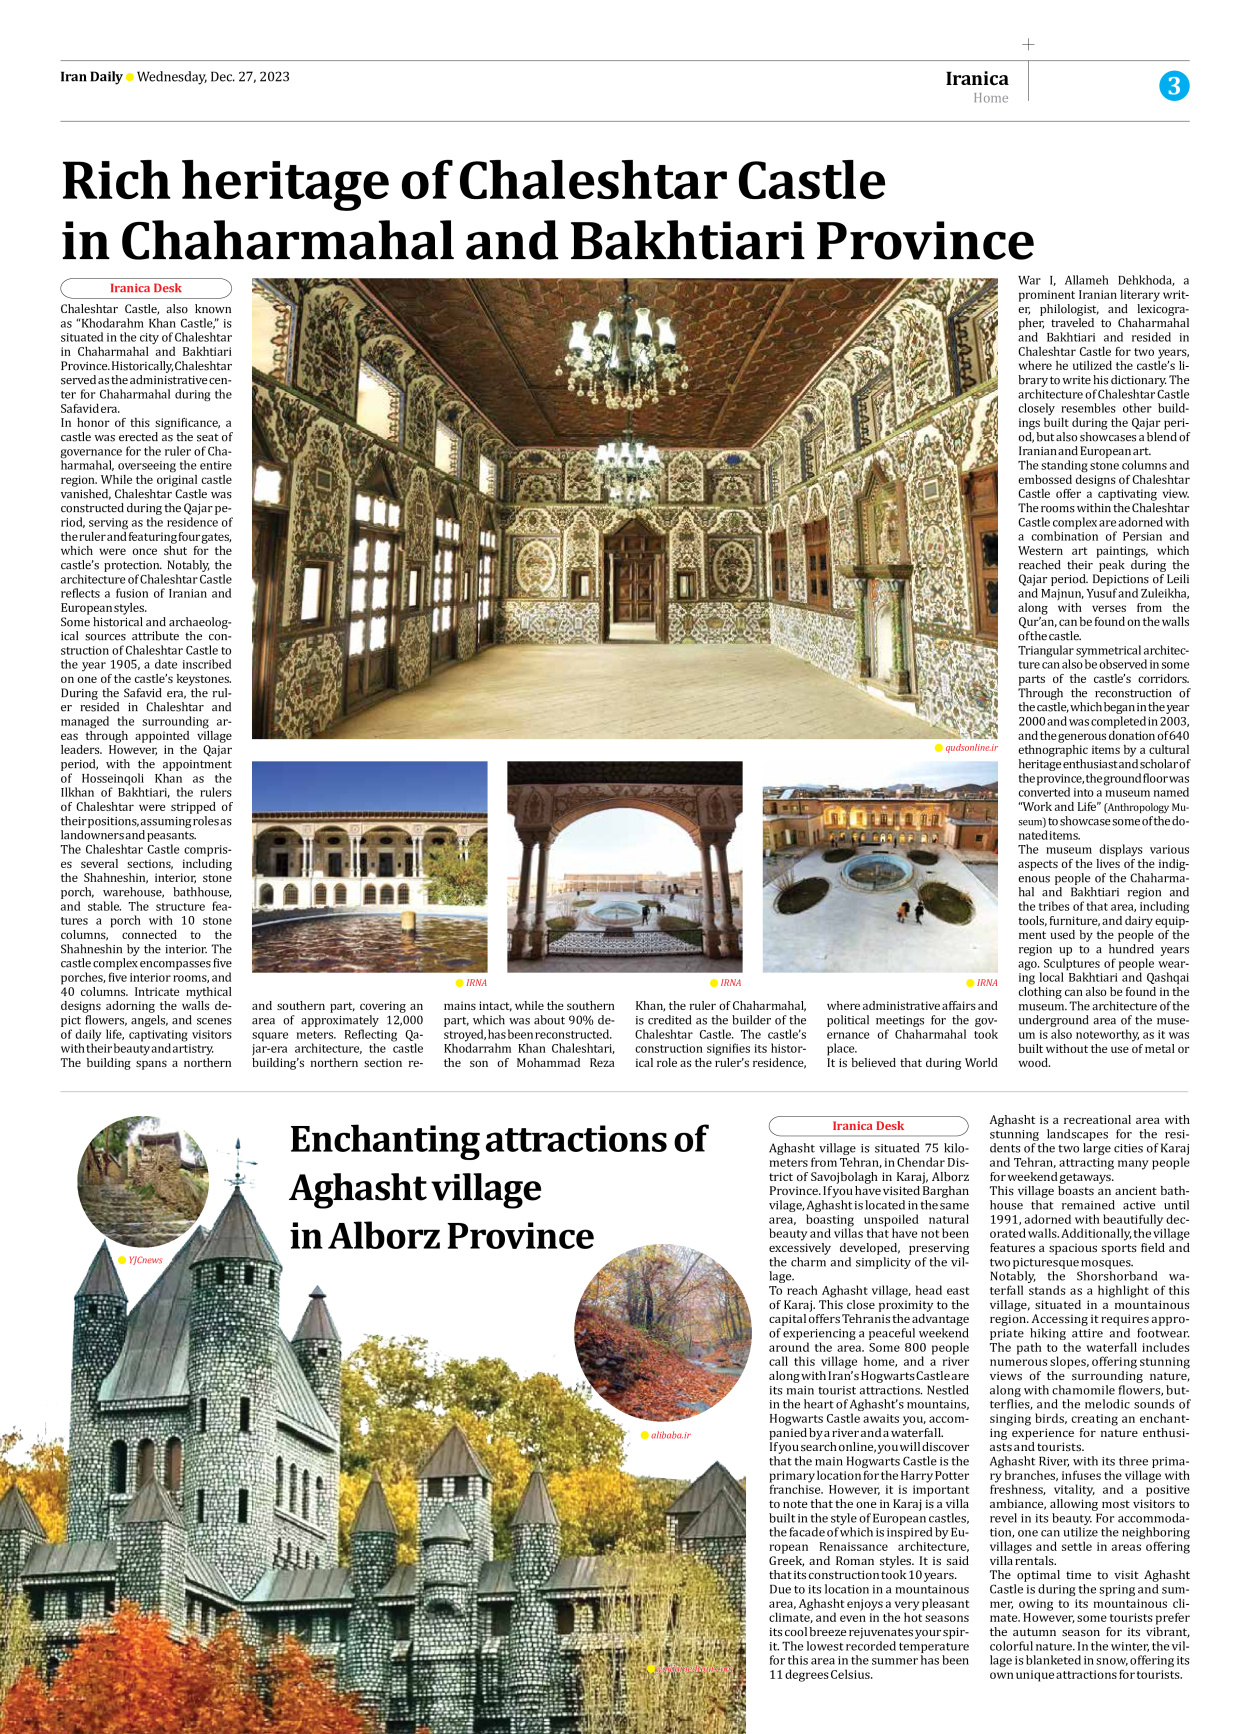 Iran Daily - Number Seven Thousand Four Hundred and Sixty Nine - 27 December 2023 - Page 3